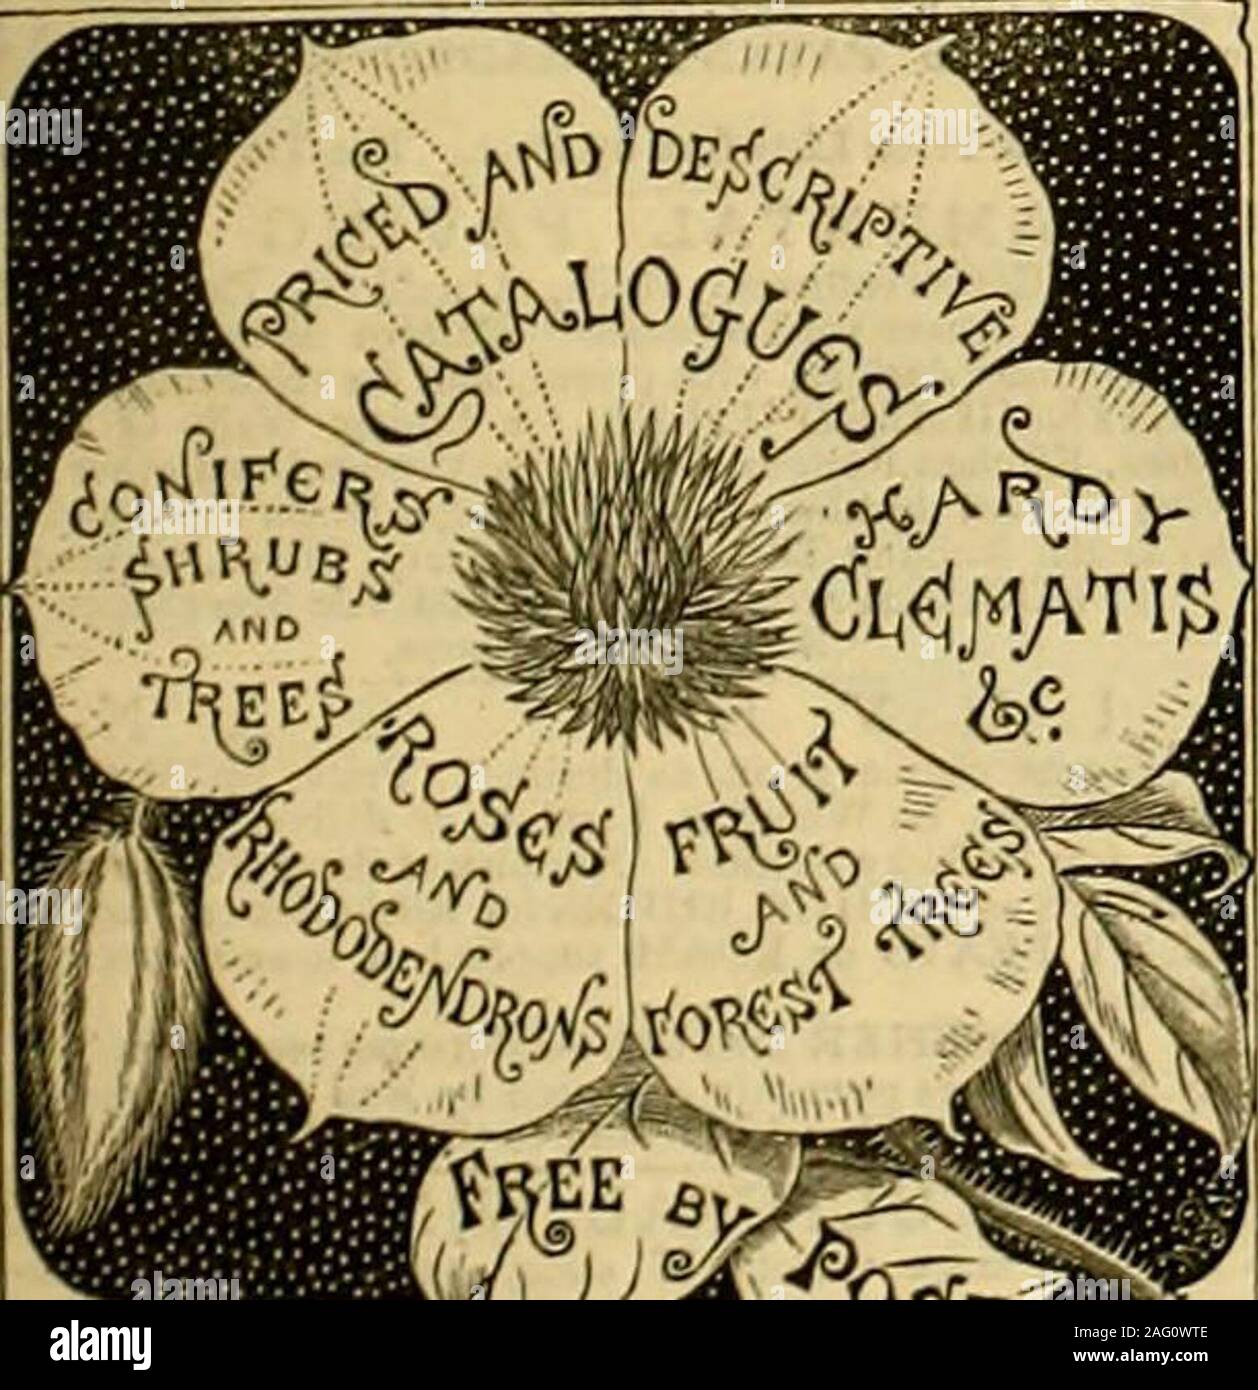 . The Gardeners' chronicle : a weekly illustrated journal of horticulture and allied subjects. ine single50 Persian Kanunculi, mixed50 Turban Ranunculi, in 4 varieties150 Crocus, in 6 vars.103 Snowdrops 13 Tulips, scarlet Van Thol12 „ Cottage Maid12 ,, YeUow Prince25 ,, double, mixed12 „ Rex Rubro* rum12 ,, late, mixed12 Scilla amoena2 Lilium candidum12 Spanish Insg Herbaceous andAlpine Plants, Cdsc, Packing, and Carnage Free to any Railway Station in England and Wales. Other CoUectlons. for Greenhouse or Conservatory, &c.. 12s. 6d, 21s., 42s.. 63s.&lt; and 843. each. From Mr. H. Bennf.tt, Bel Stock Photo